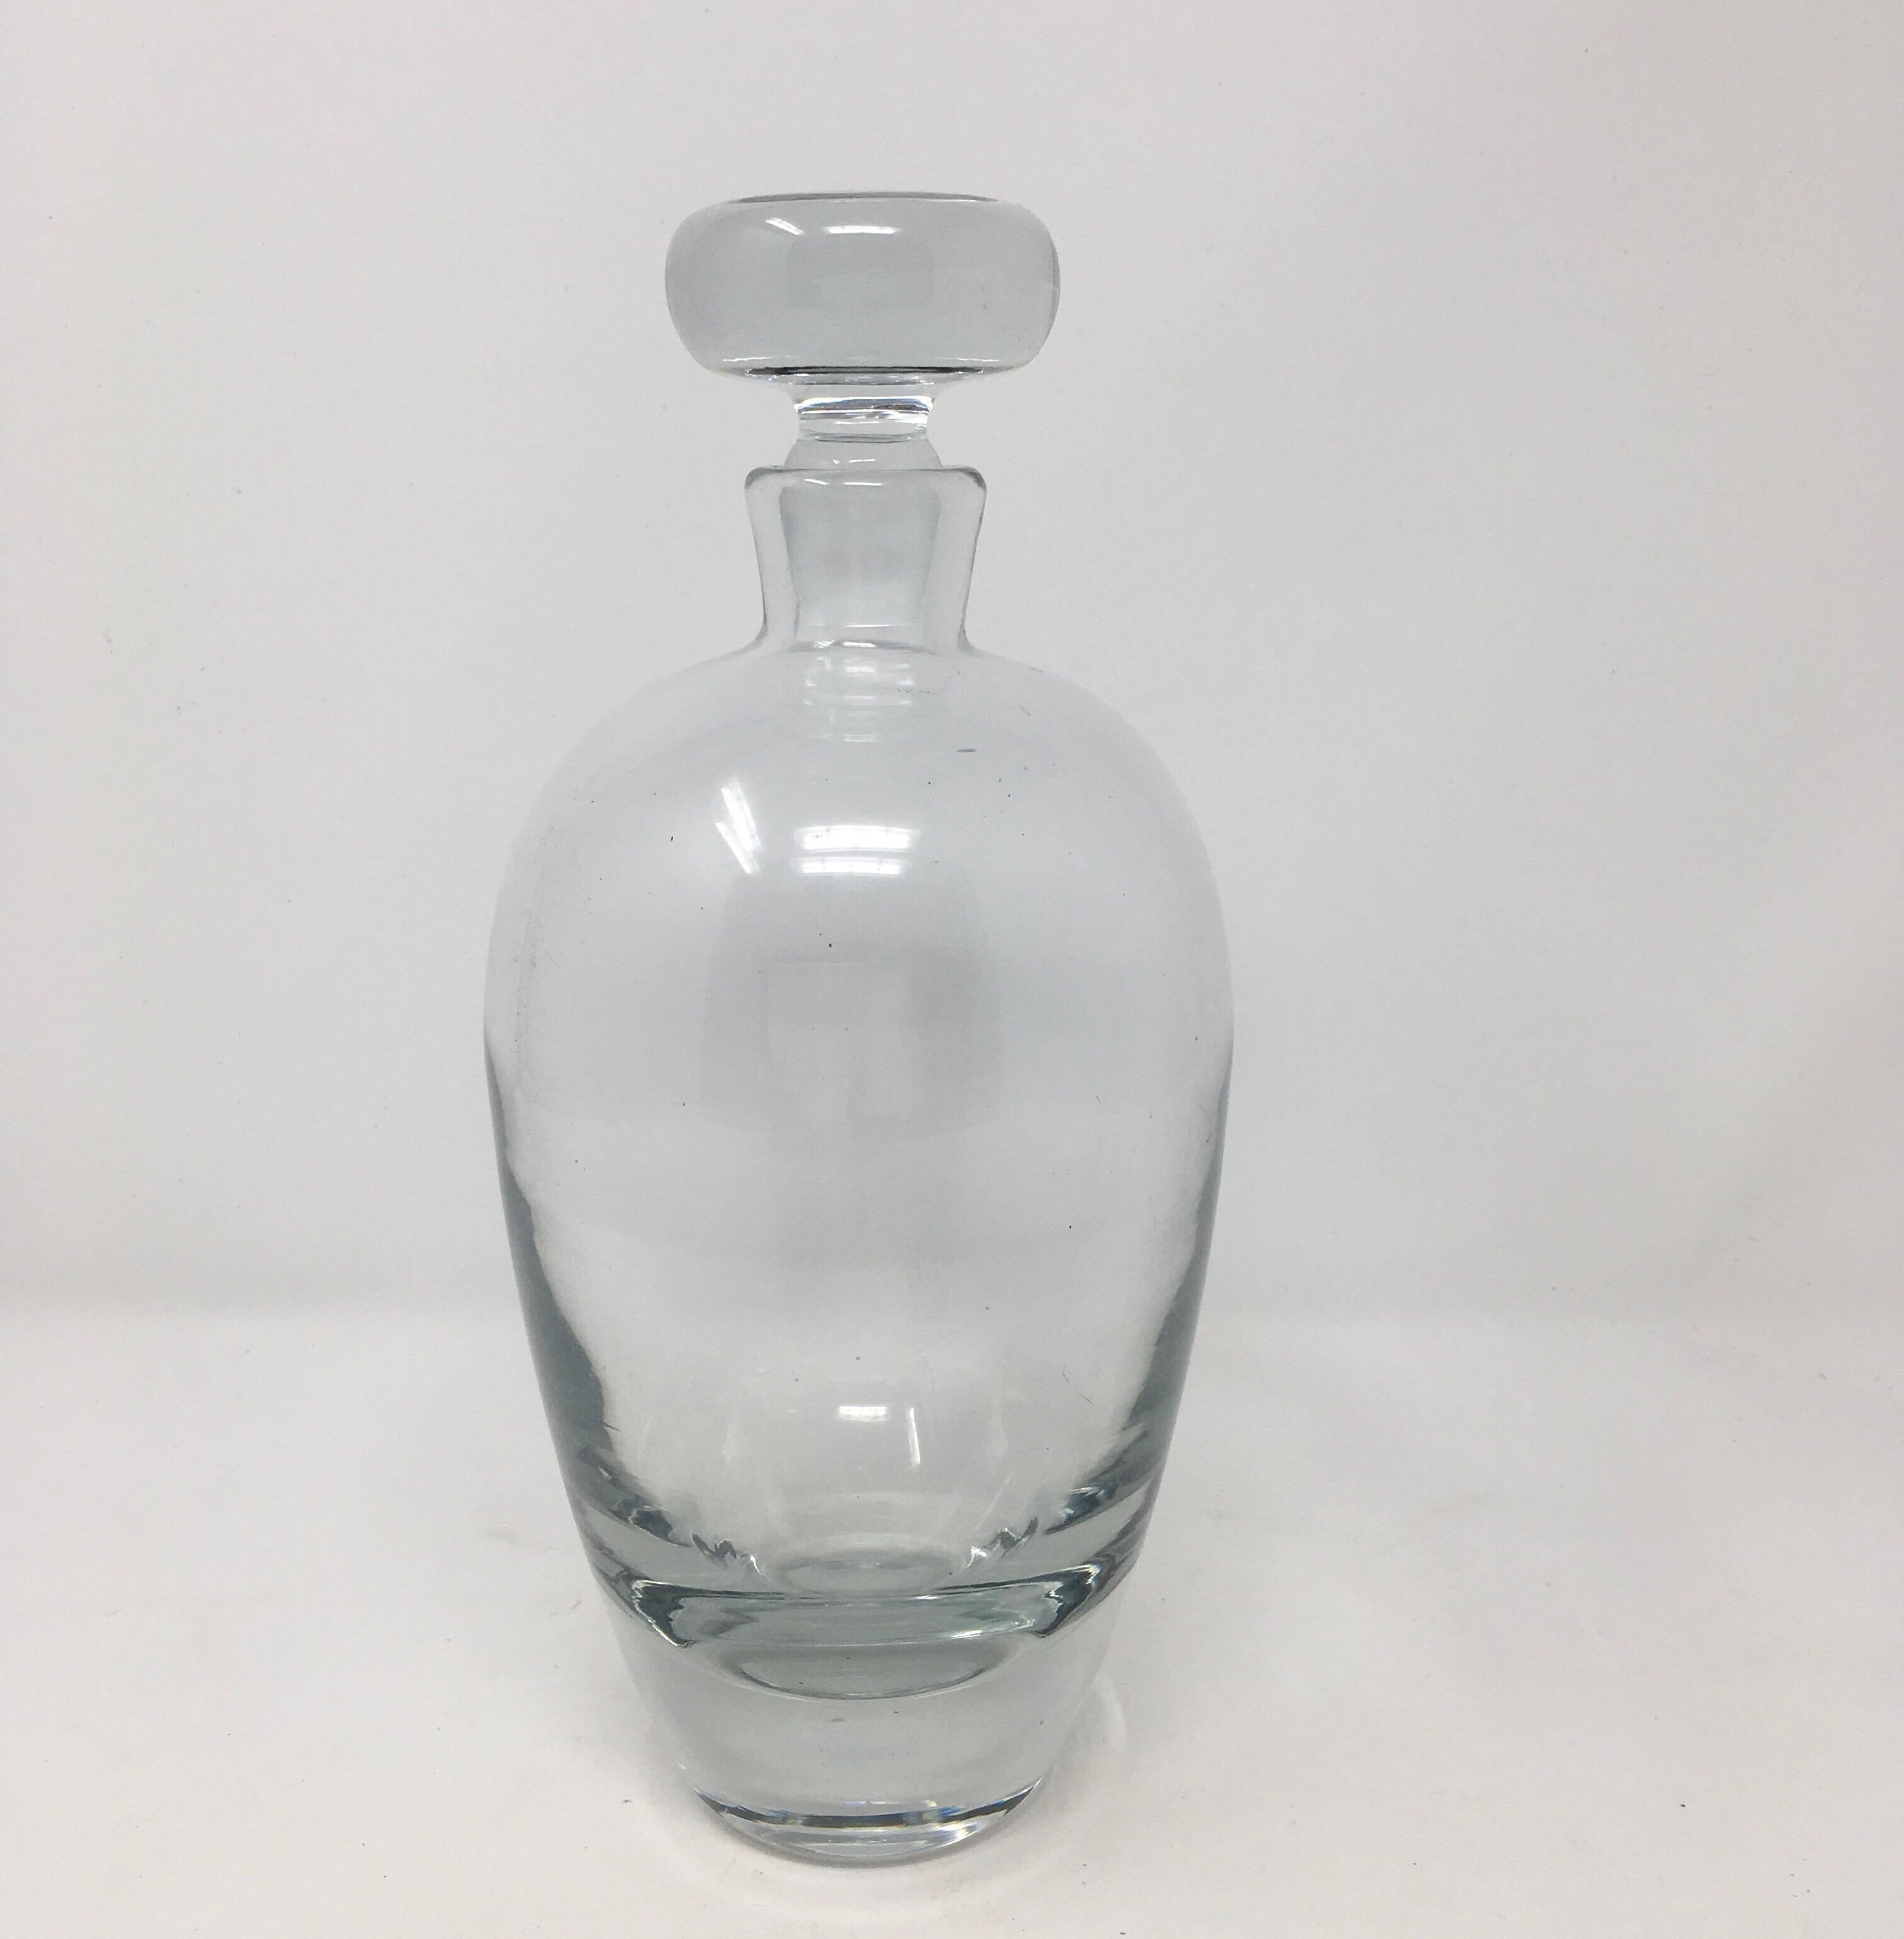 This is a 20th century crystal decanter with stopper. This beautiful decanter is ready for your bar or bar cart.